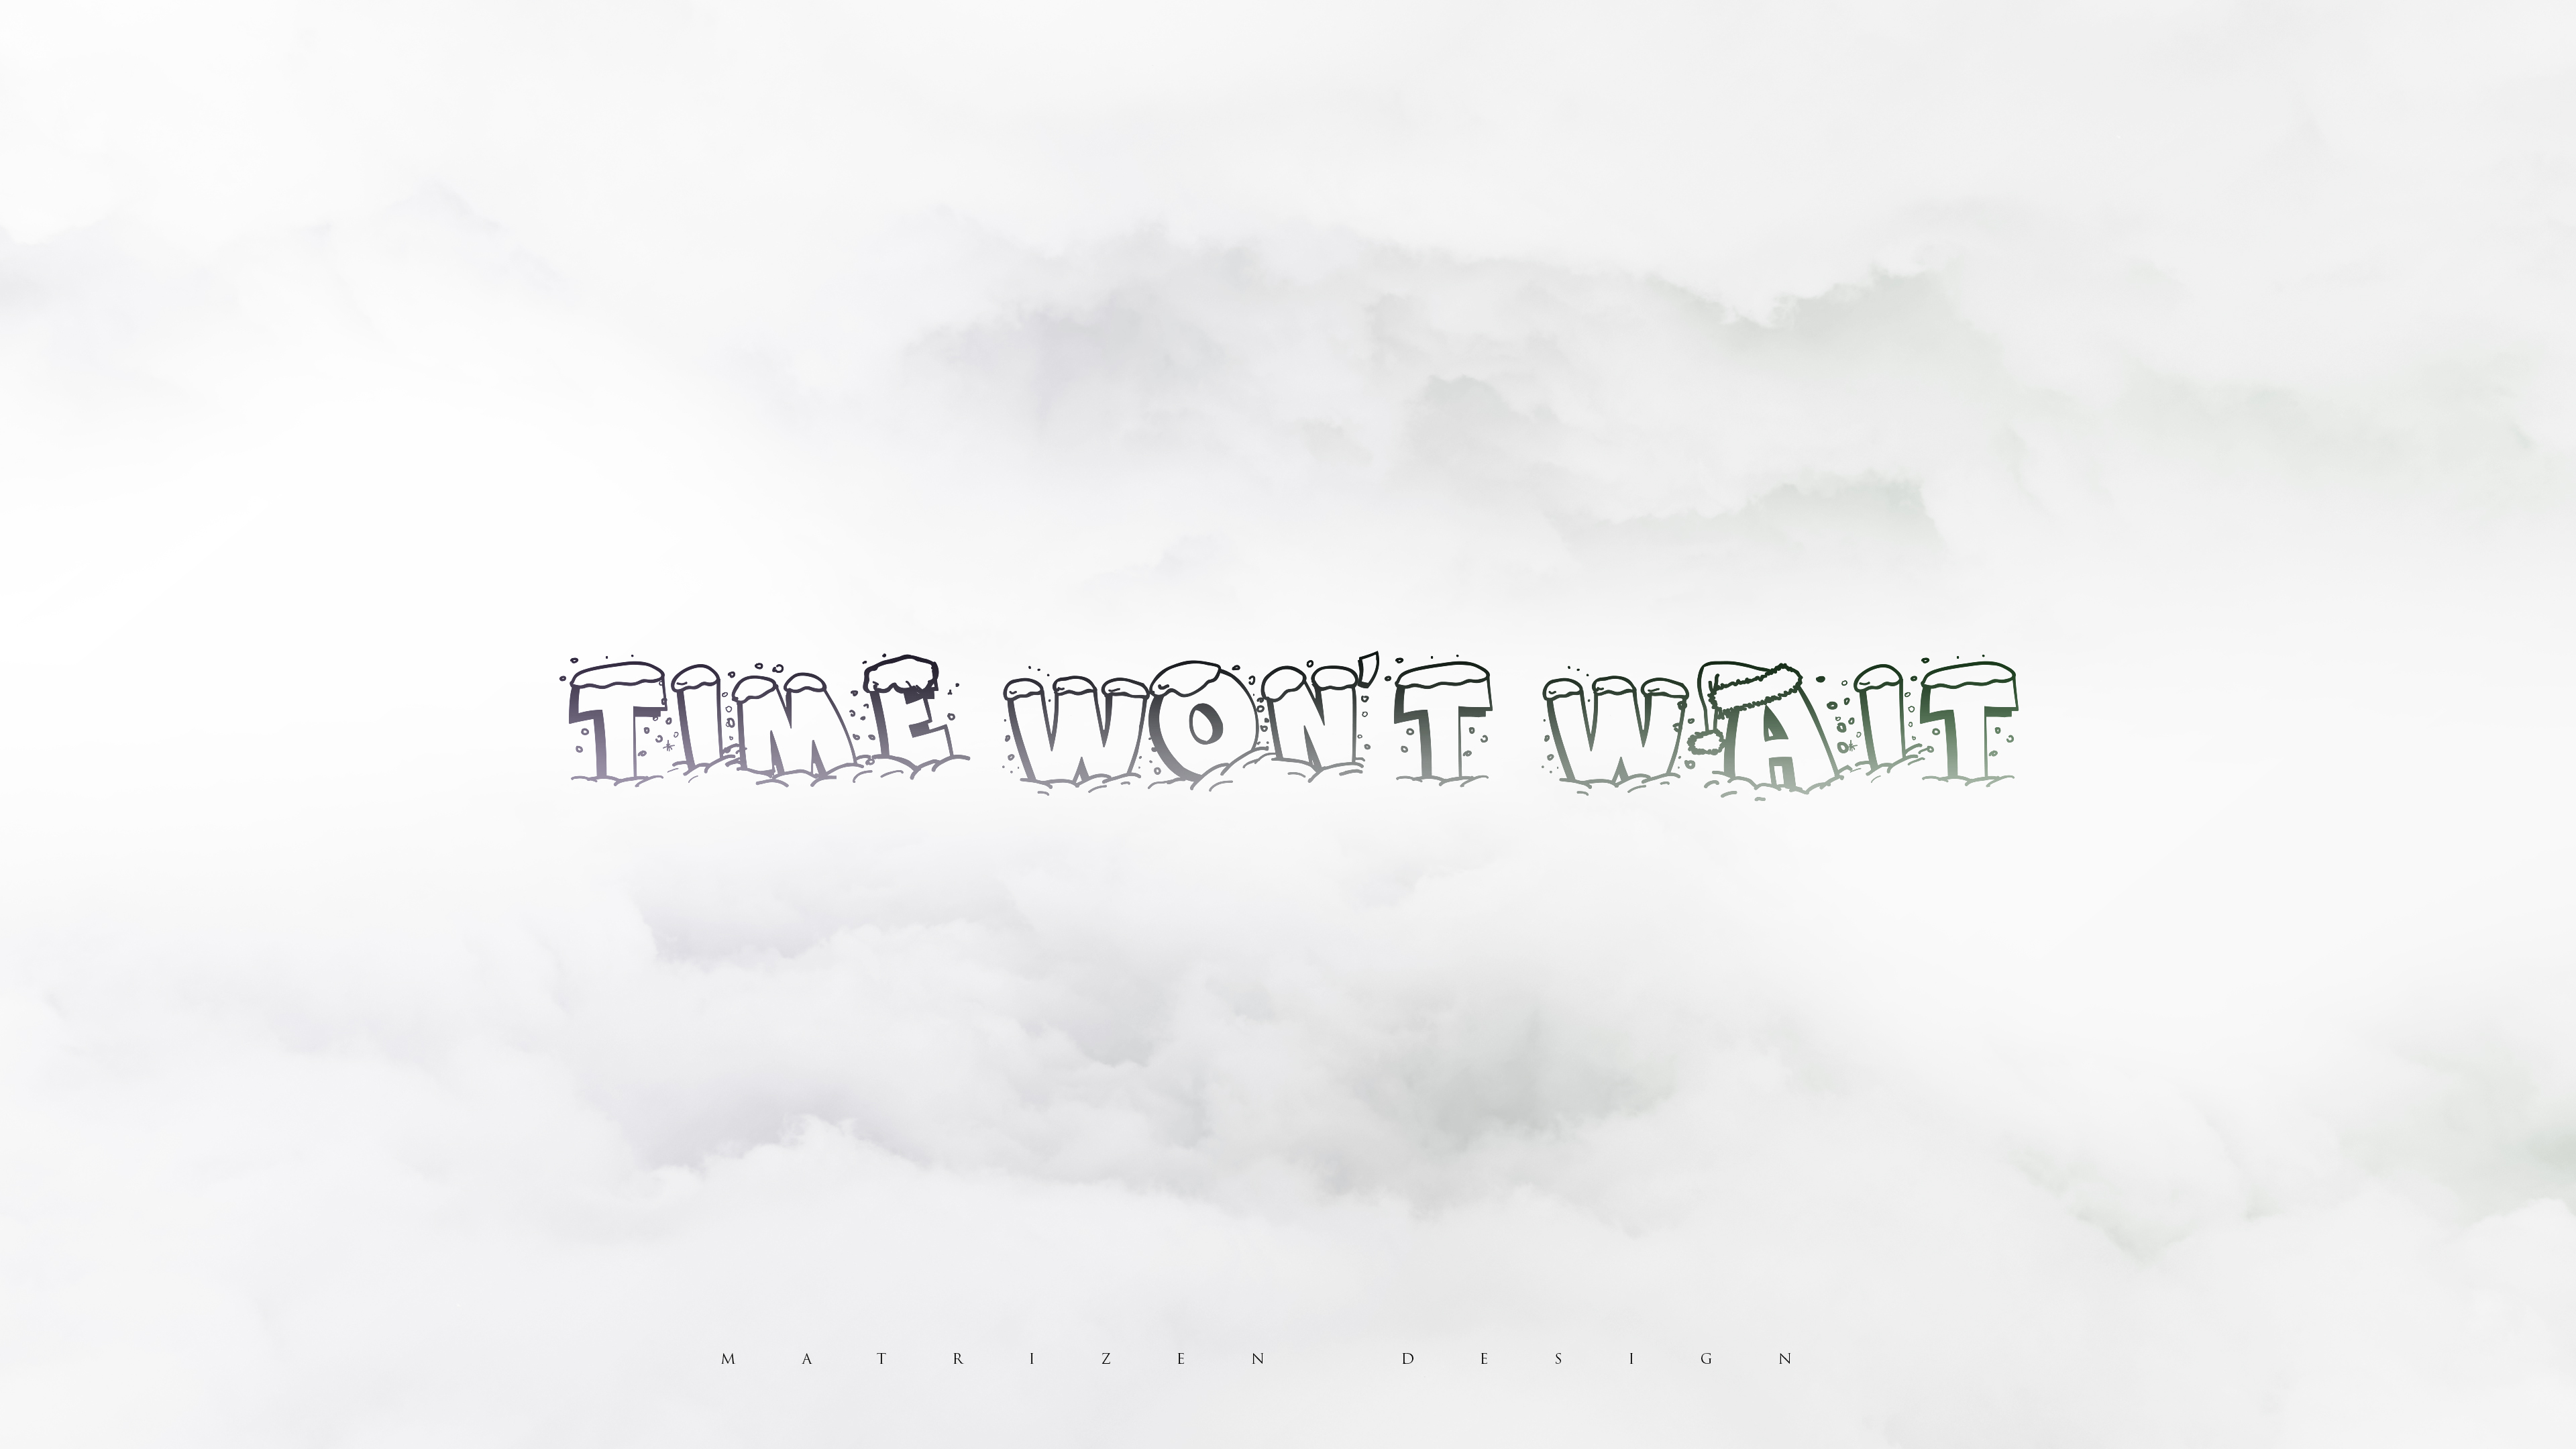 typography, Quote, Text, Snow, Digital art, Minimalism, Clouds, White  background, Photoshop Wallpaper